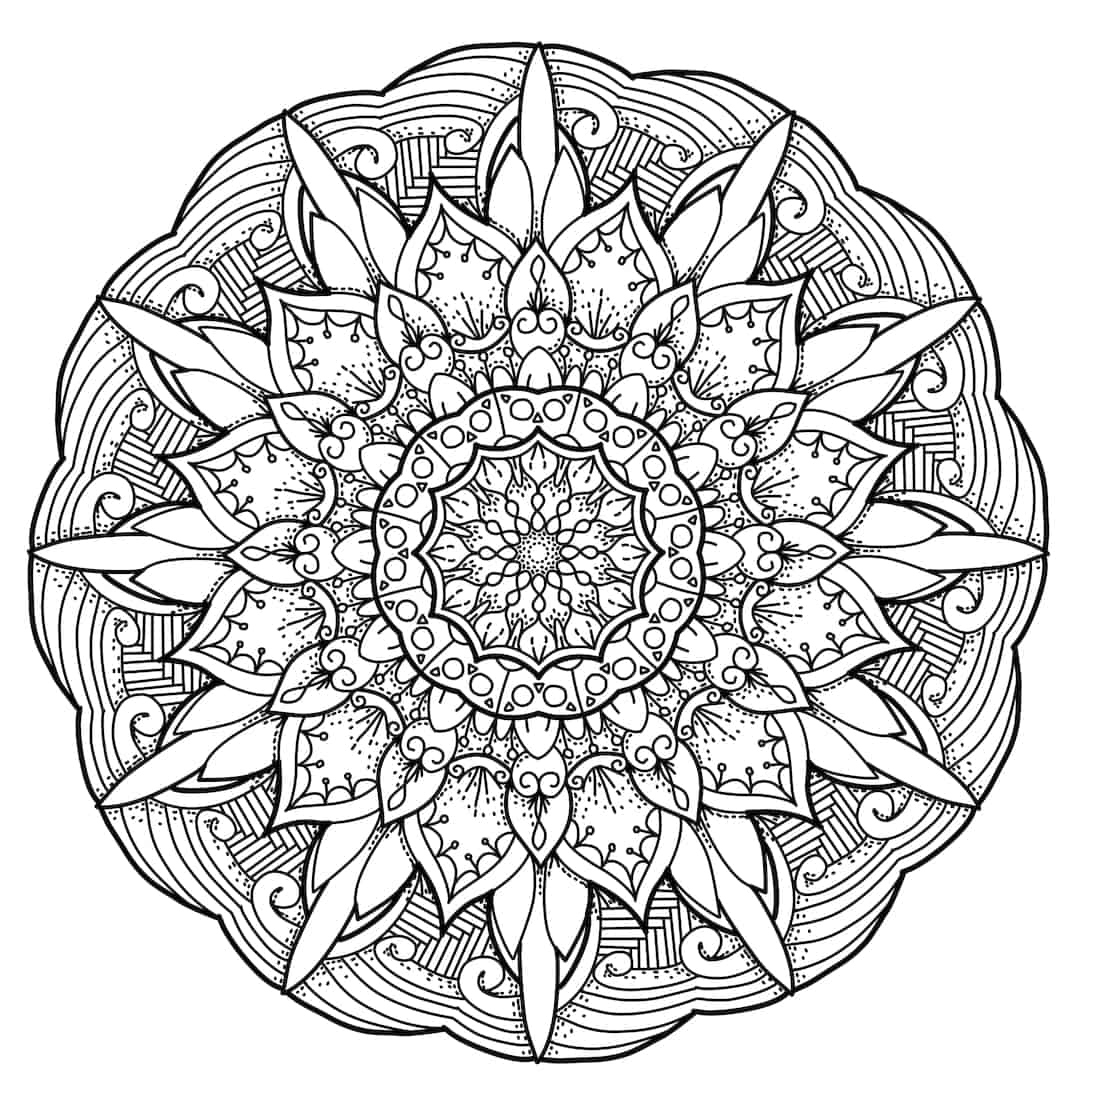 Free Coloring Pages For You To Print - Monday Mandala intended for Free Printable Mandalas